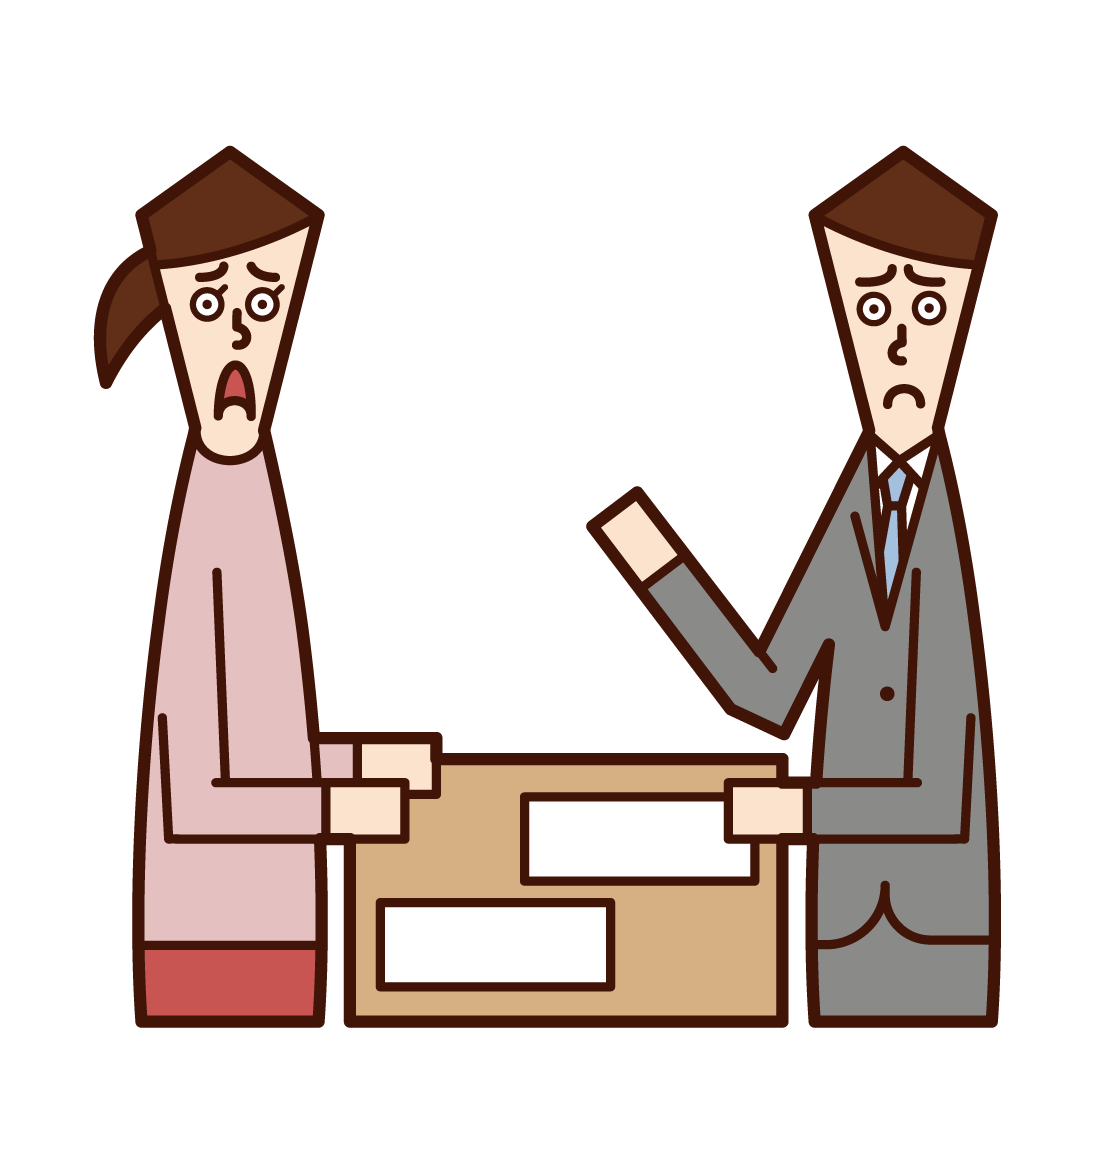 Illustration of a person (male) who consults, consults troubles, and counsels troubles